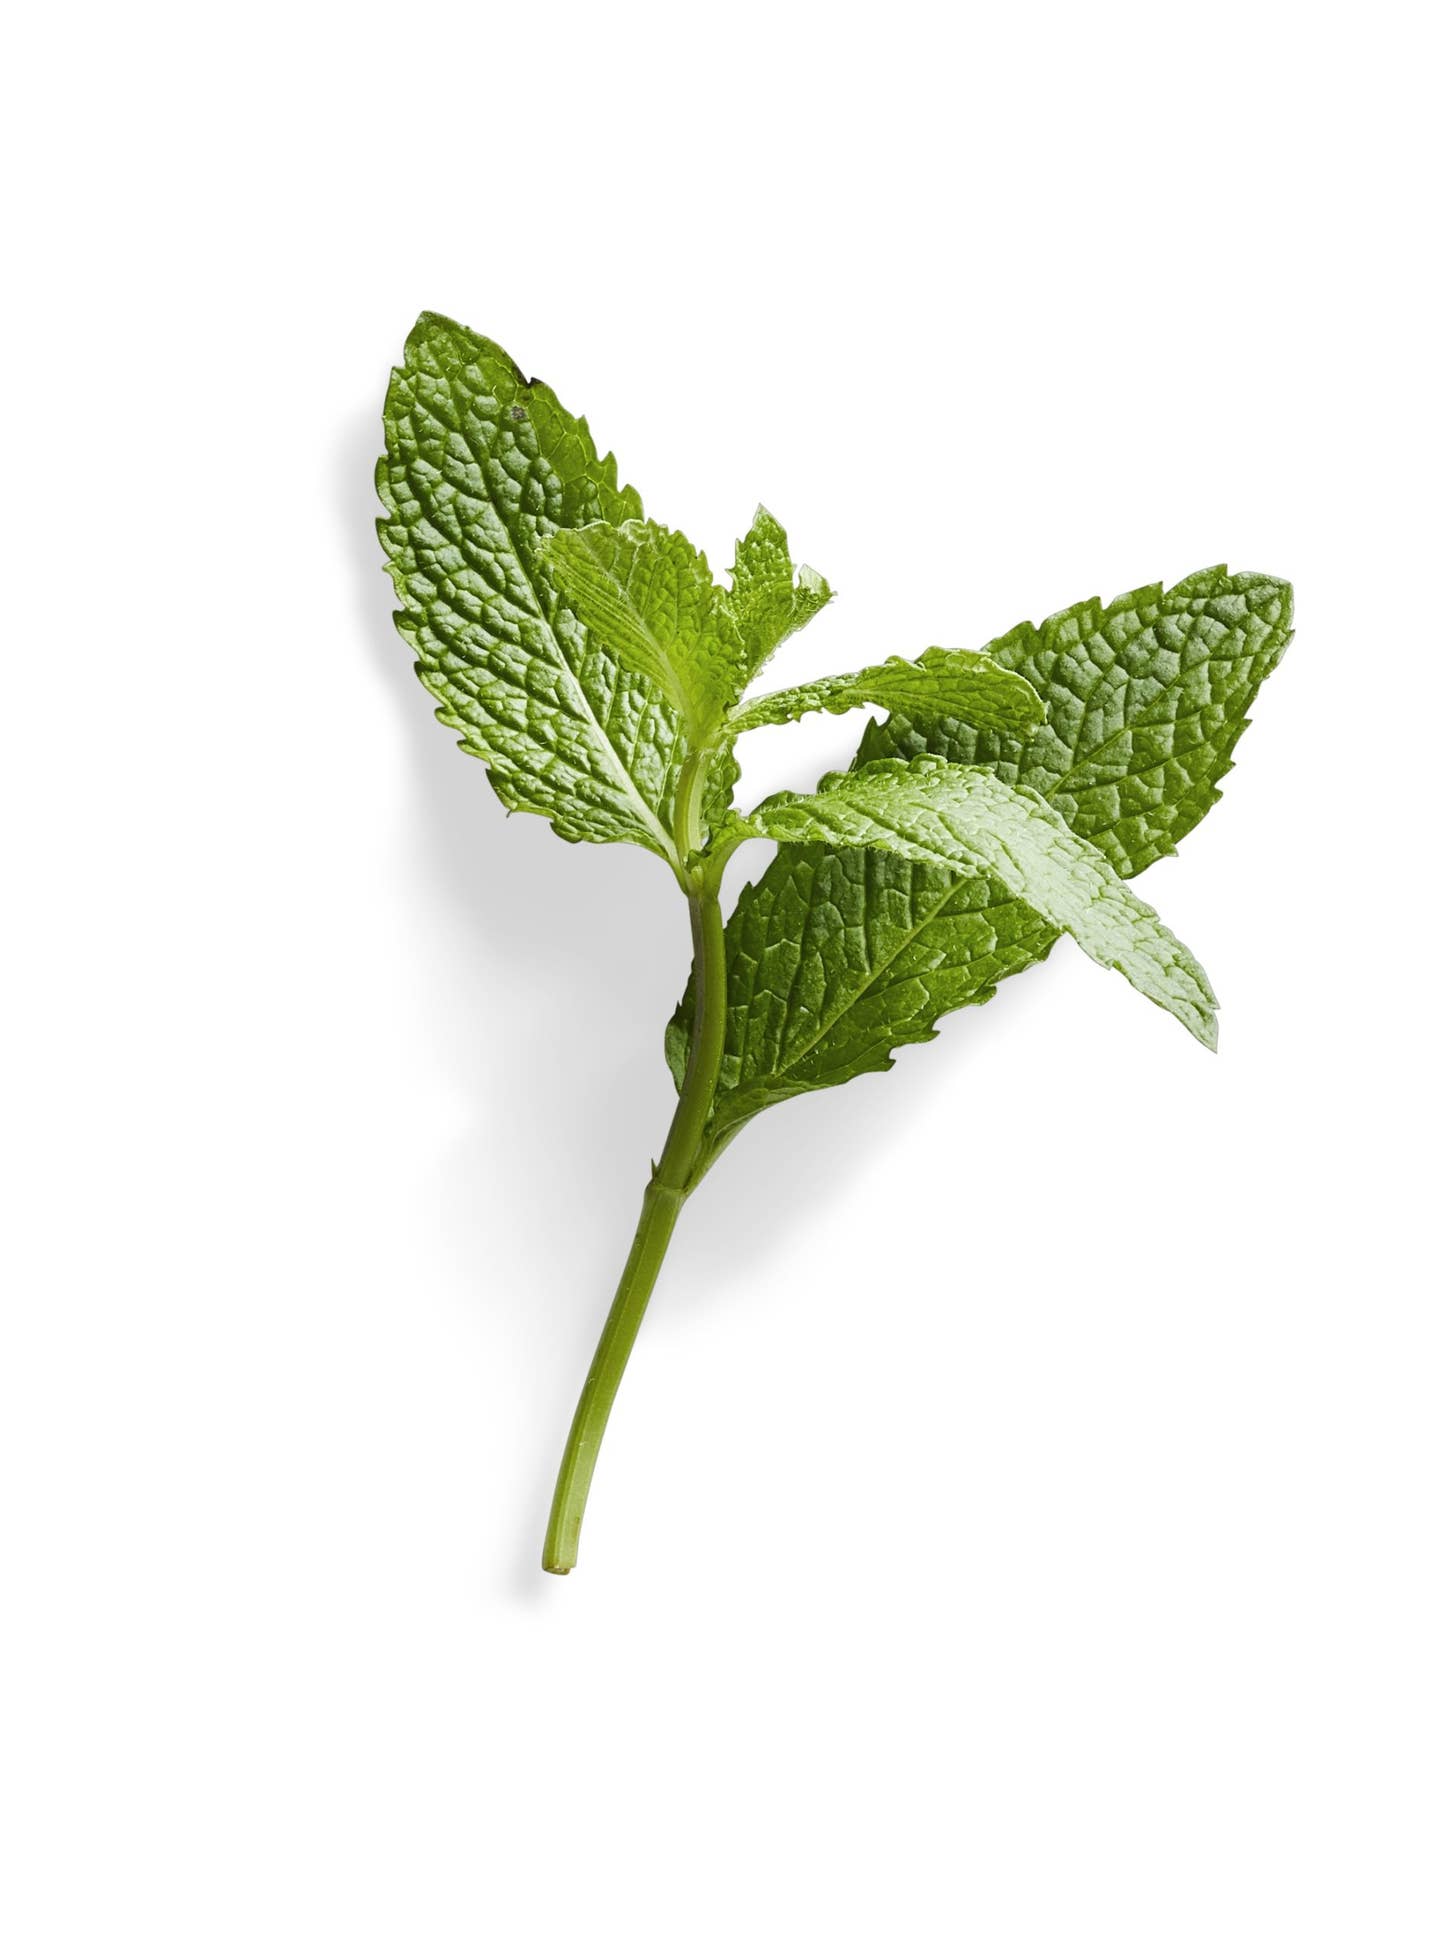 A sprig of fresh mint on a white background